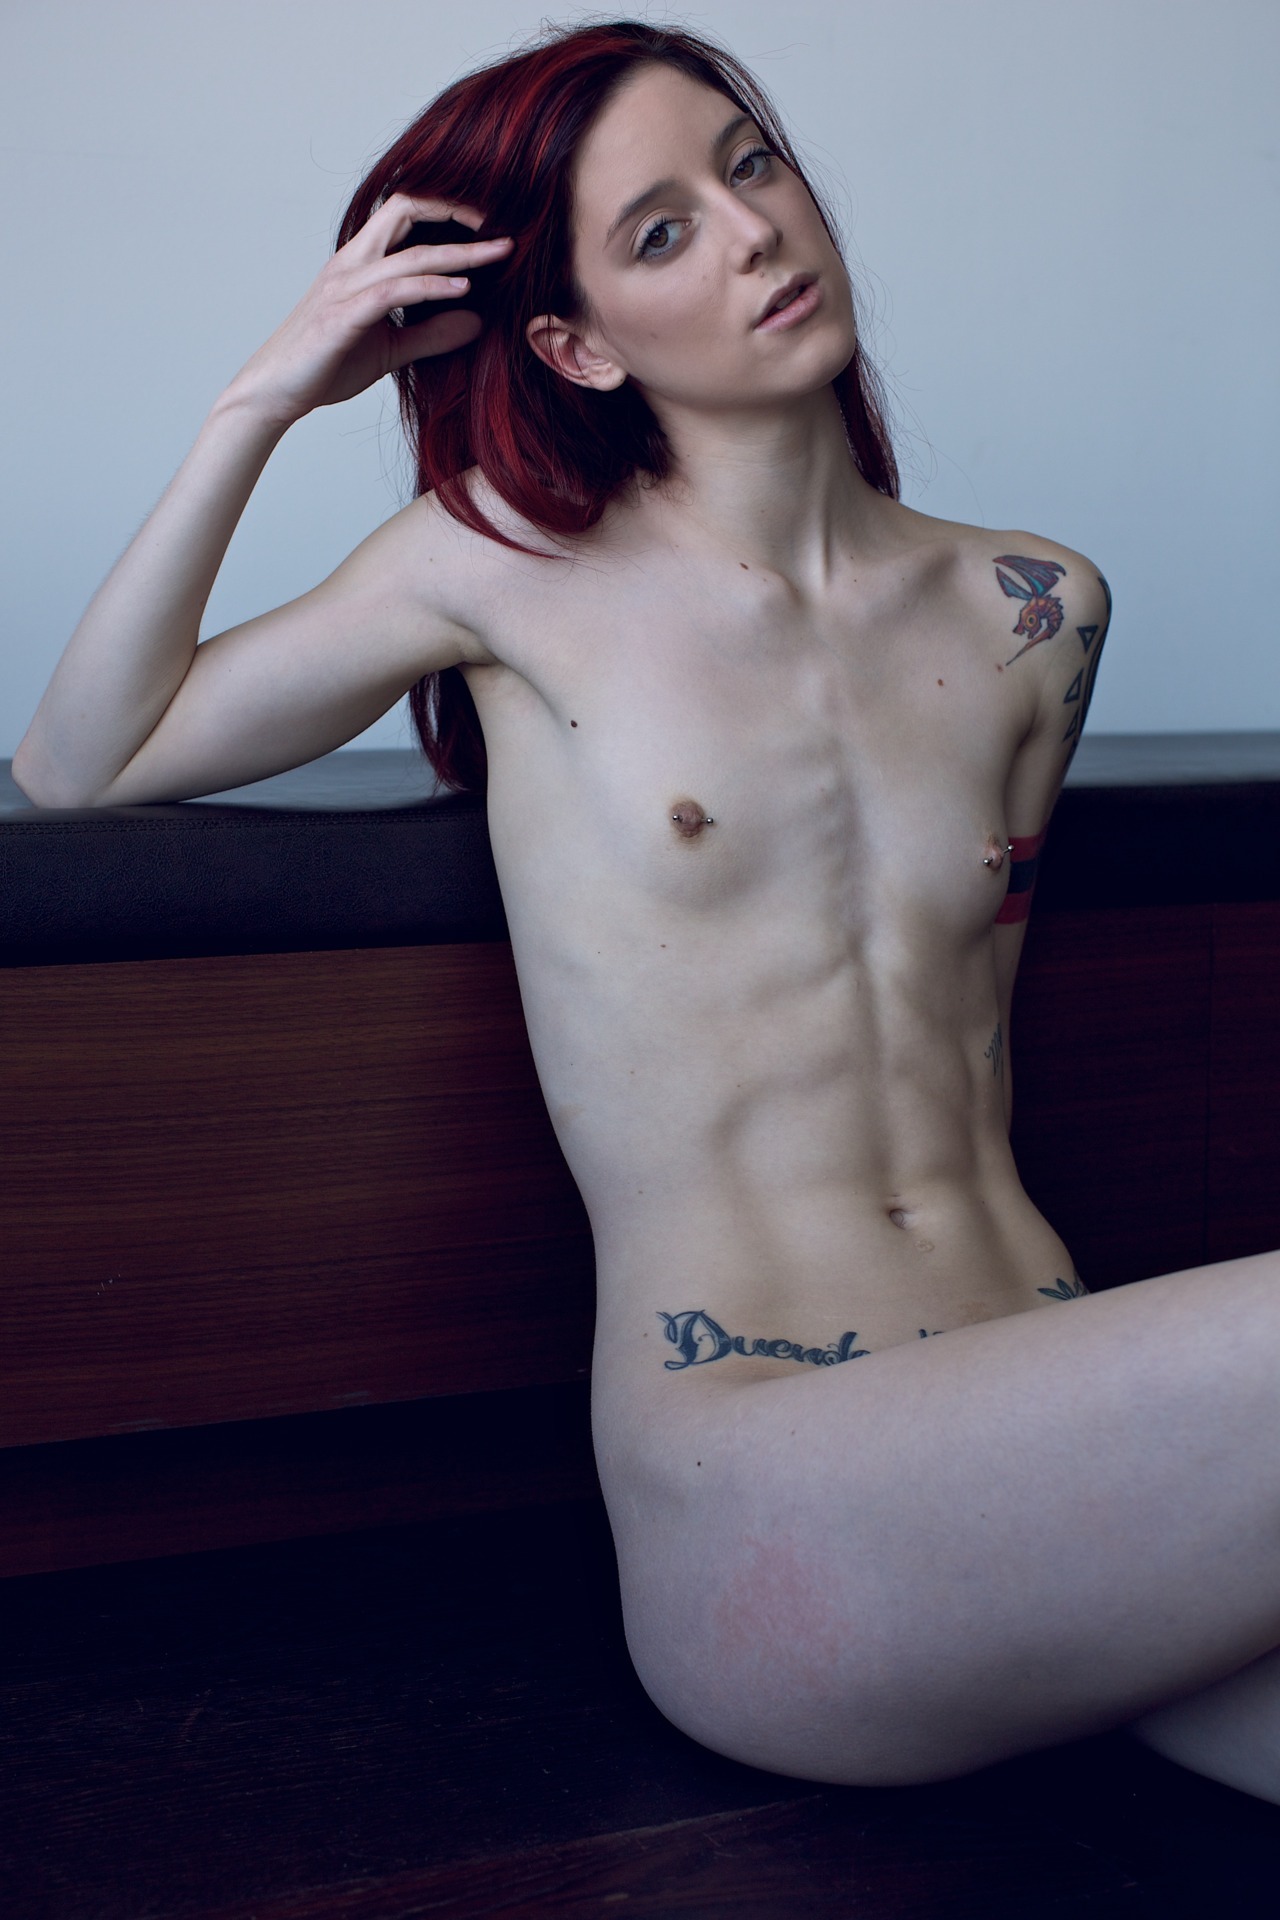 Extremely skinny girls posing nude for food